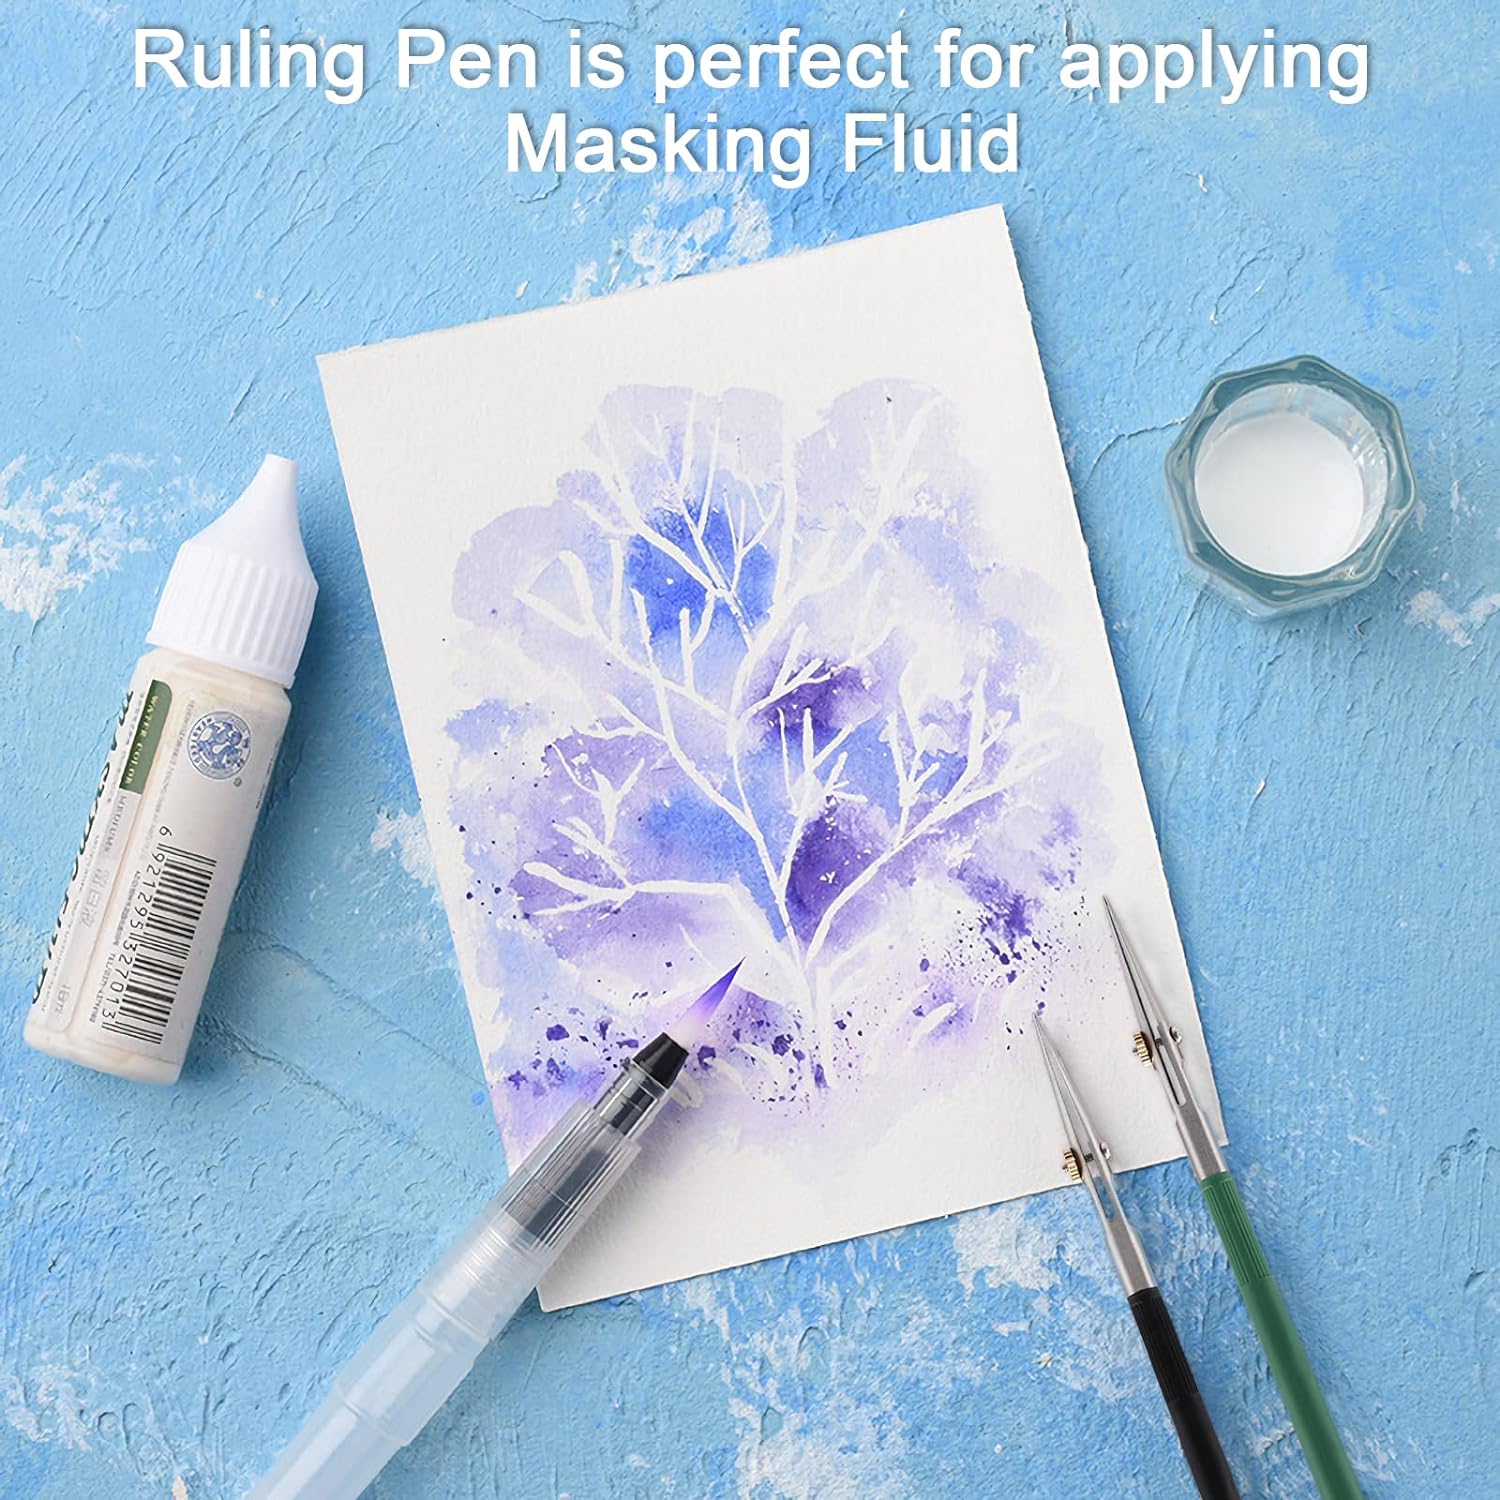 Ruling Pen for Masking Fluid,Perfect Fine Line Drawing